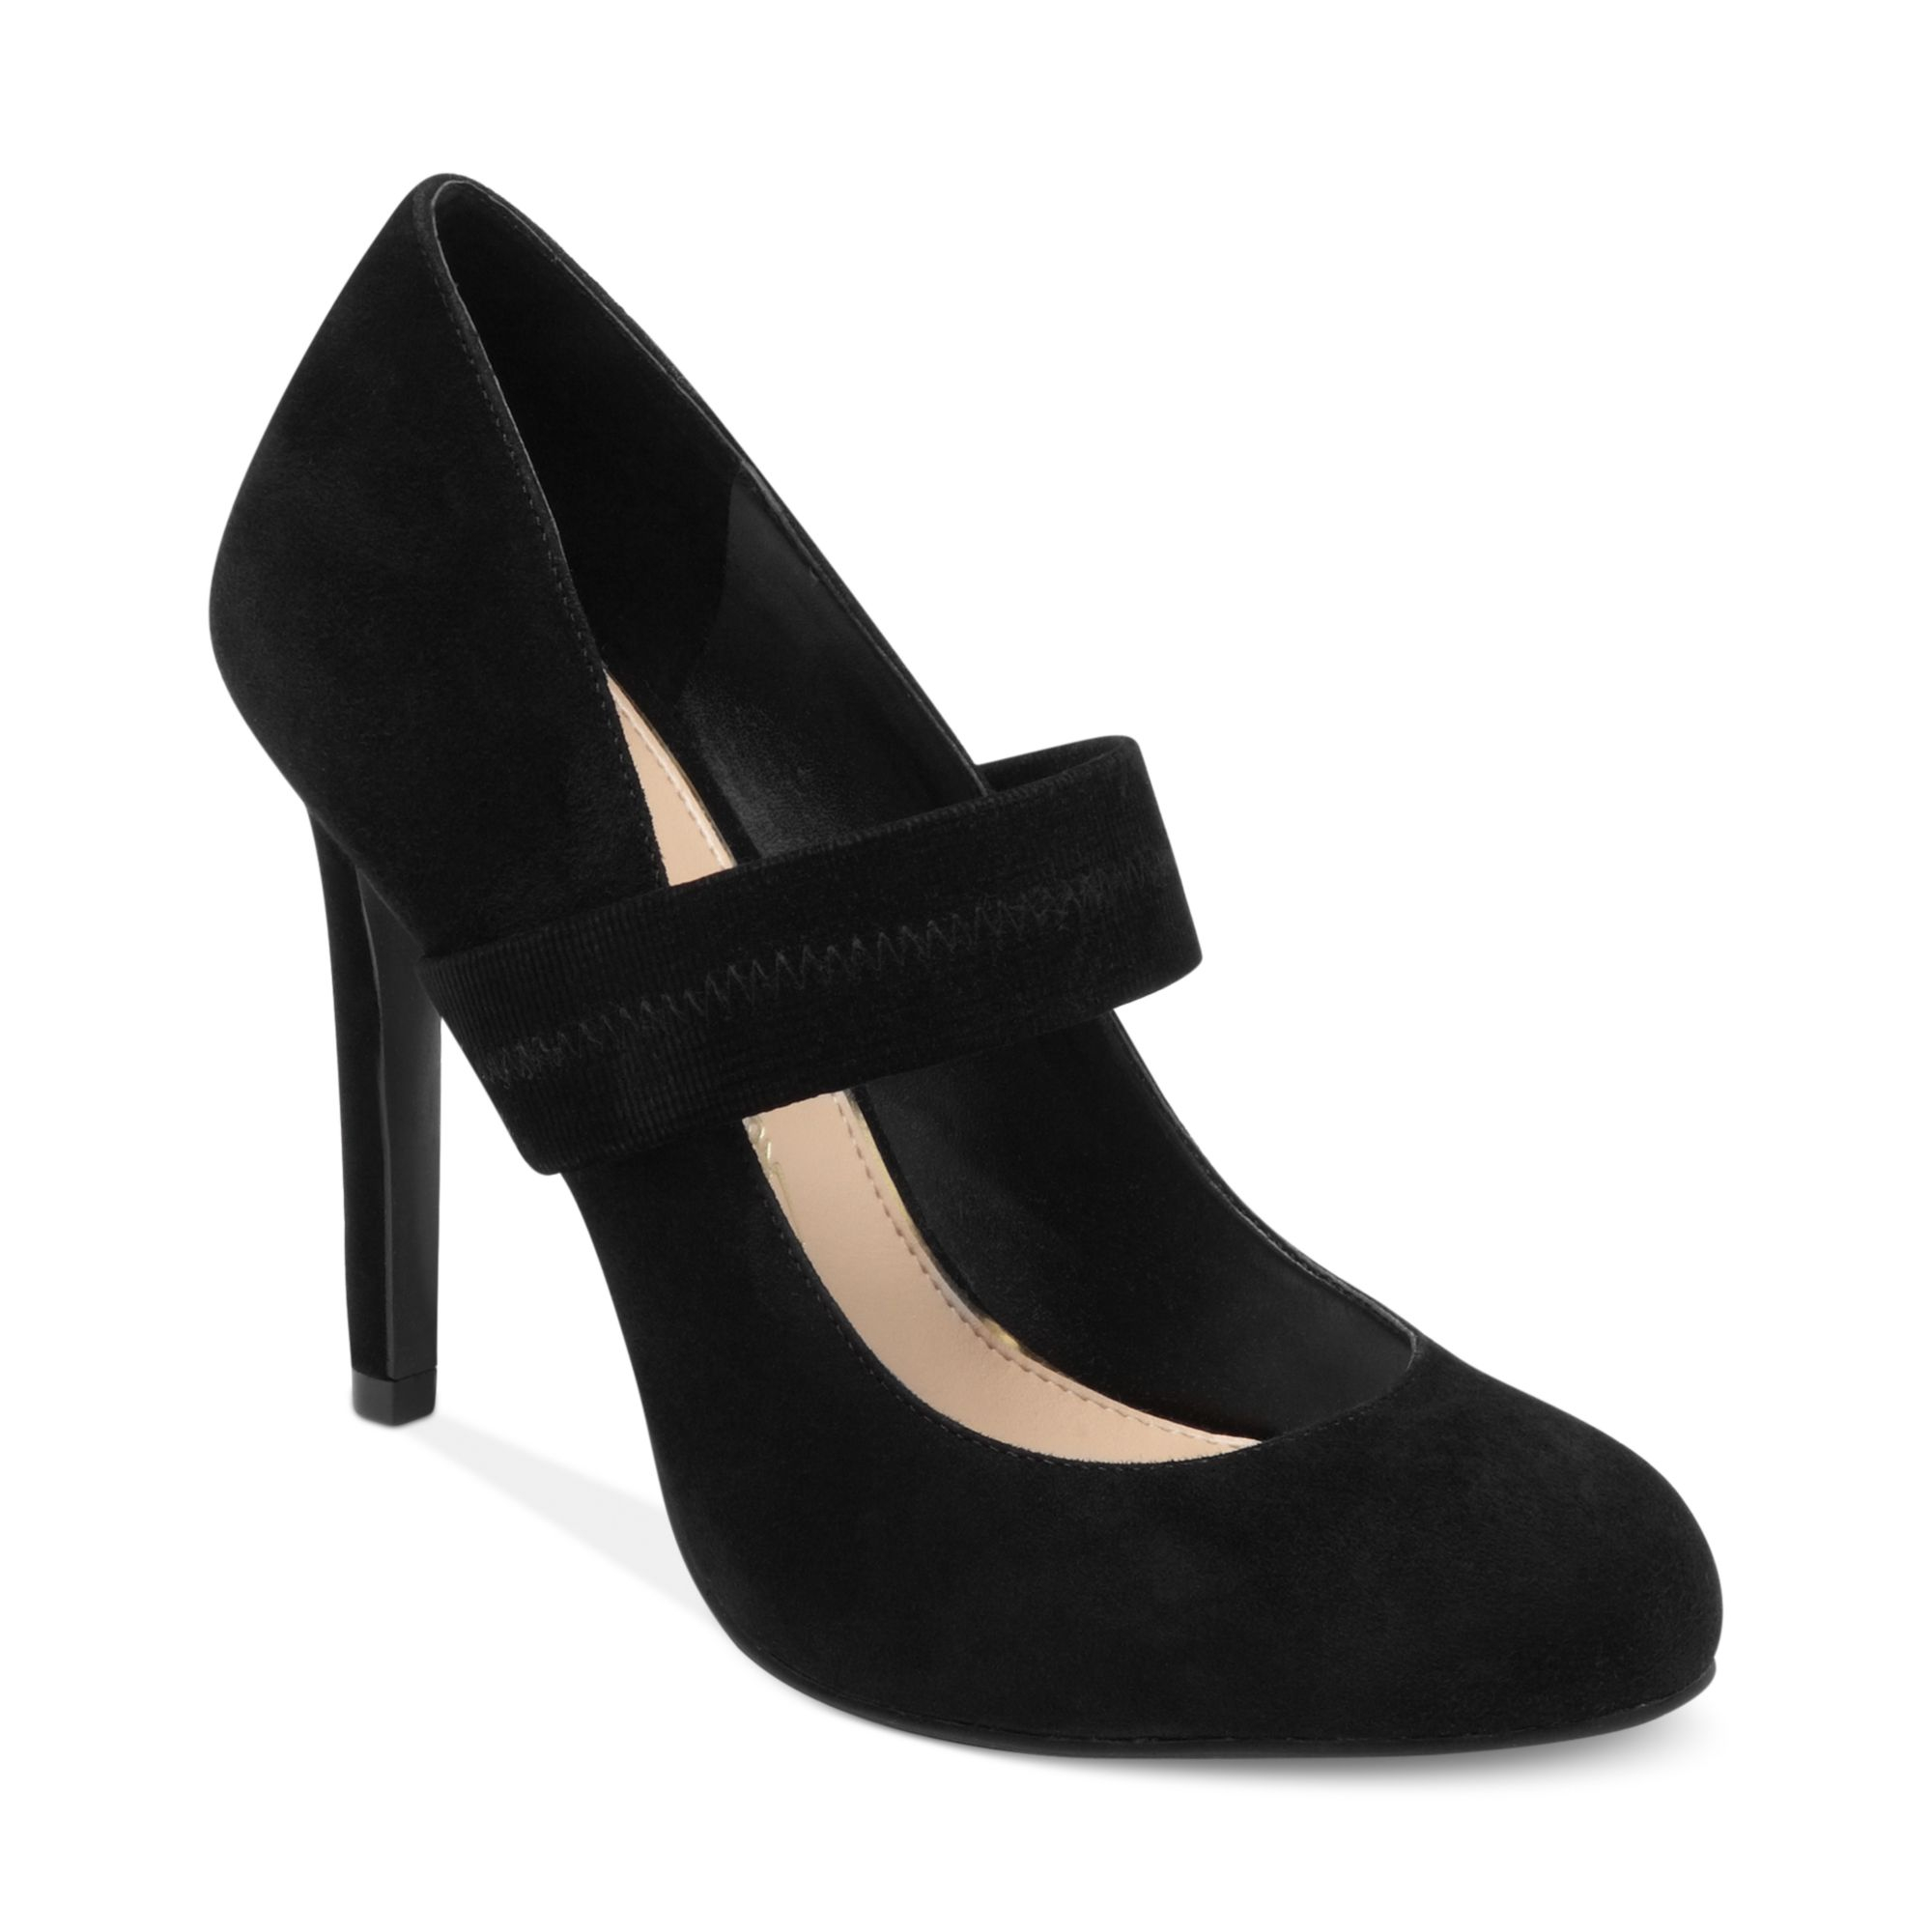 Jessica Simpson Sacha Mary Jane Pumps in Black (Black Suede) | Lyst